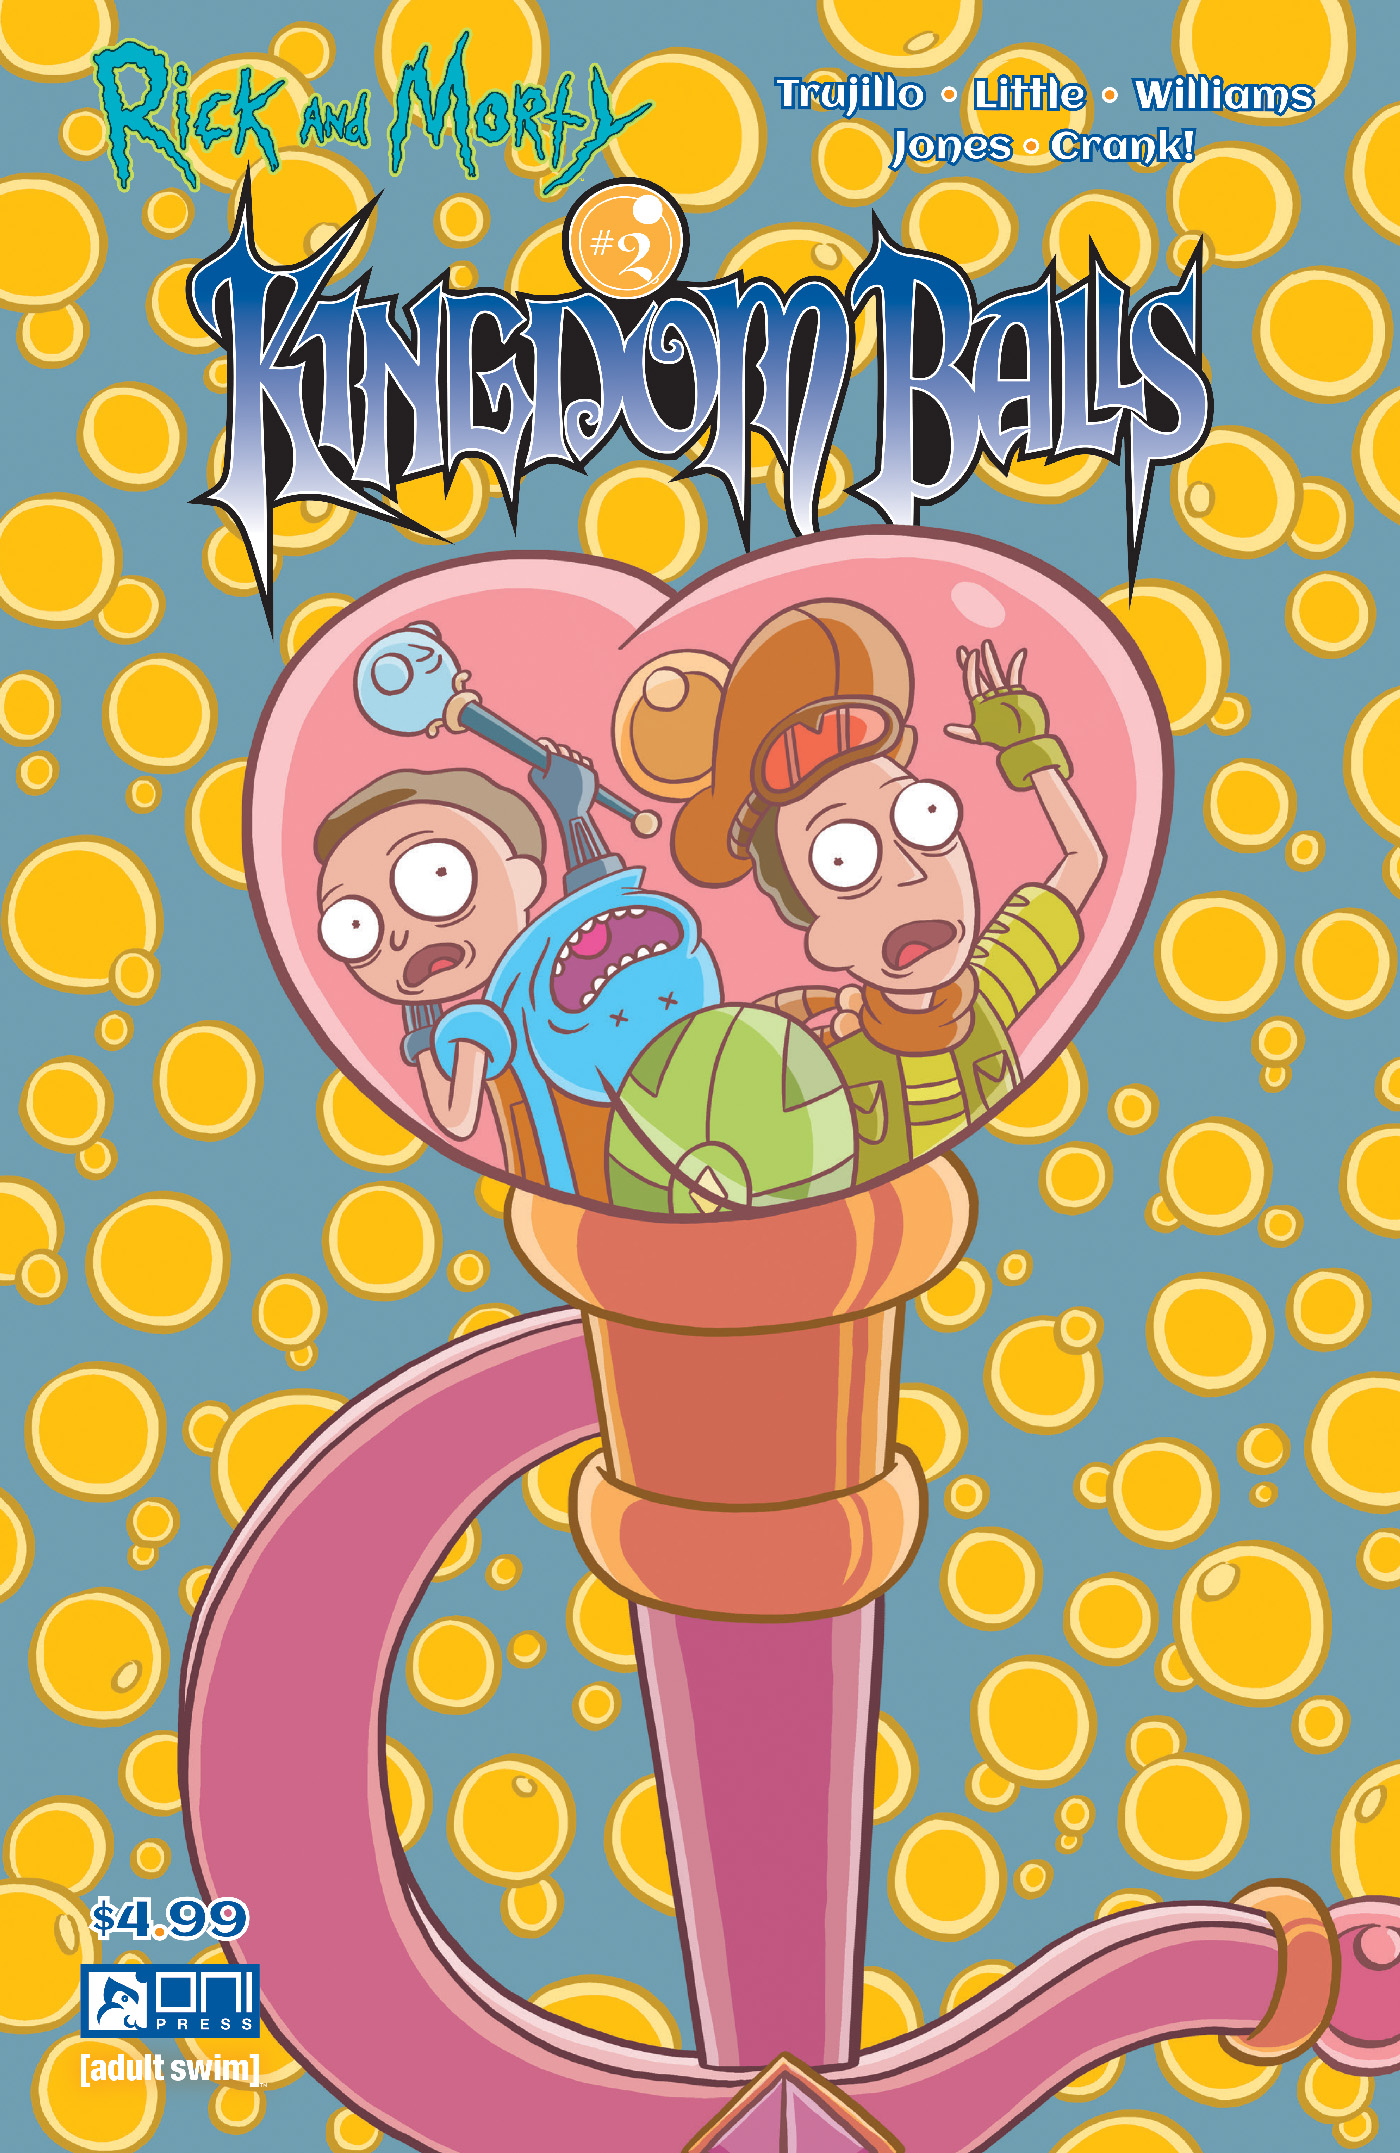 Rick and Morty Kingdom Balls #2 Cover B Dean Rankine Variant (Of 4)